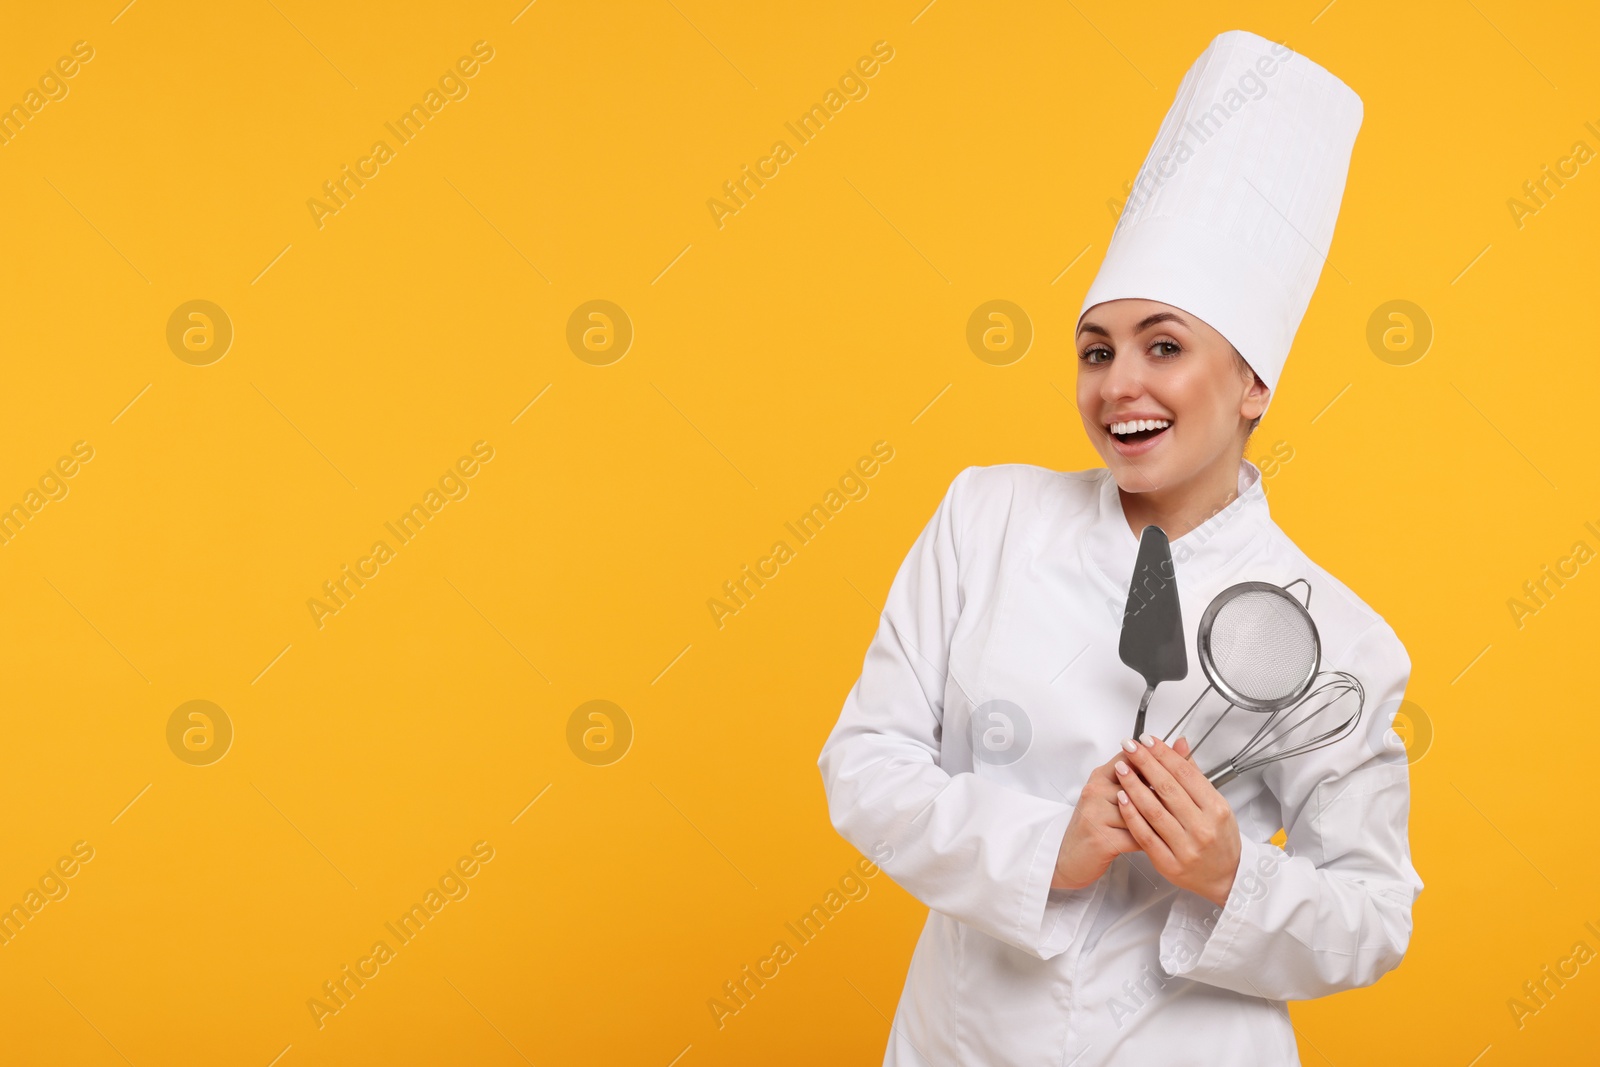 Photo of Happy confectioner in uniform holding professional tools on yellow background. Space for text